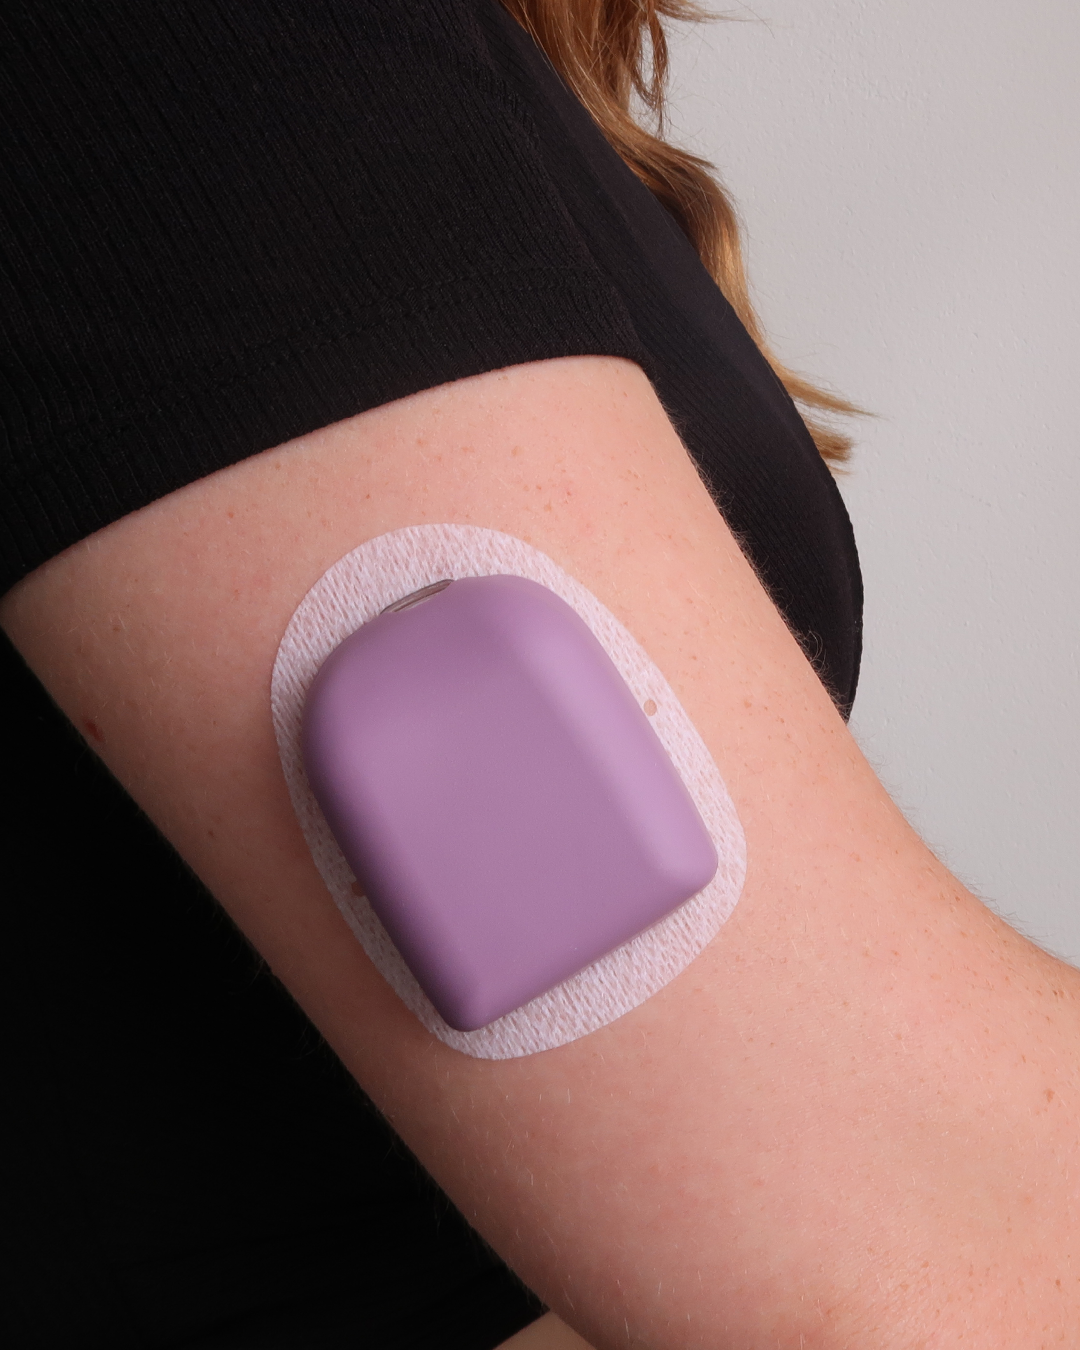 Omnipod Cover - FREE Sample